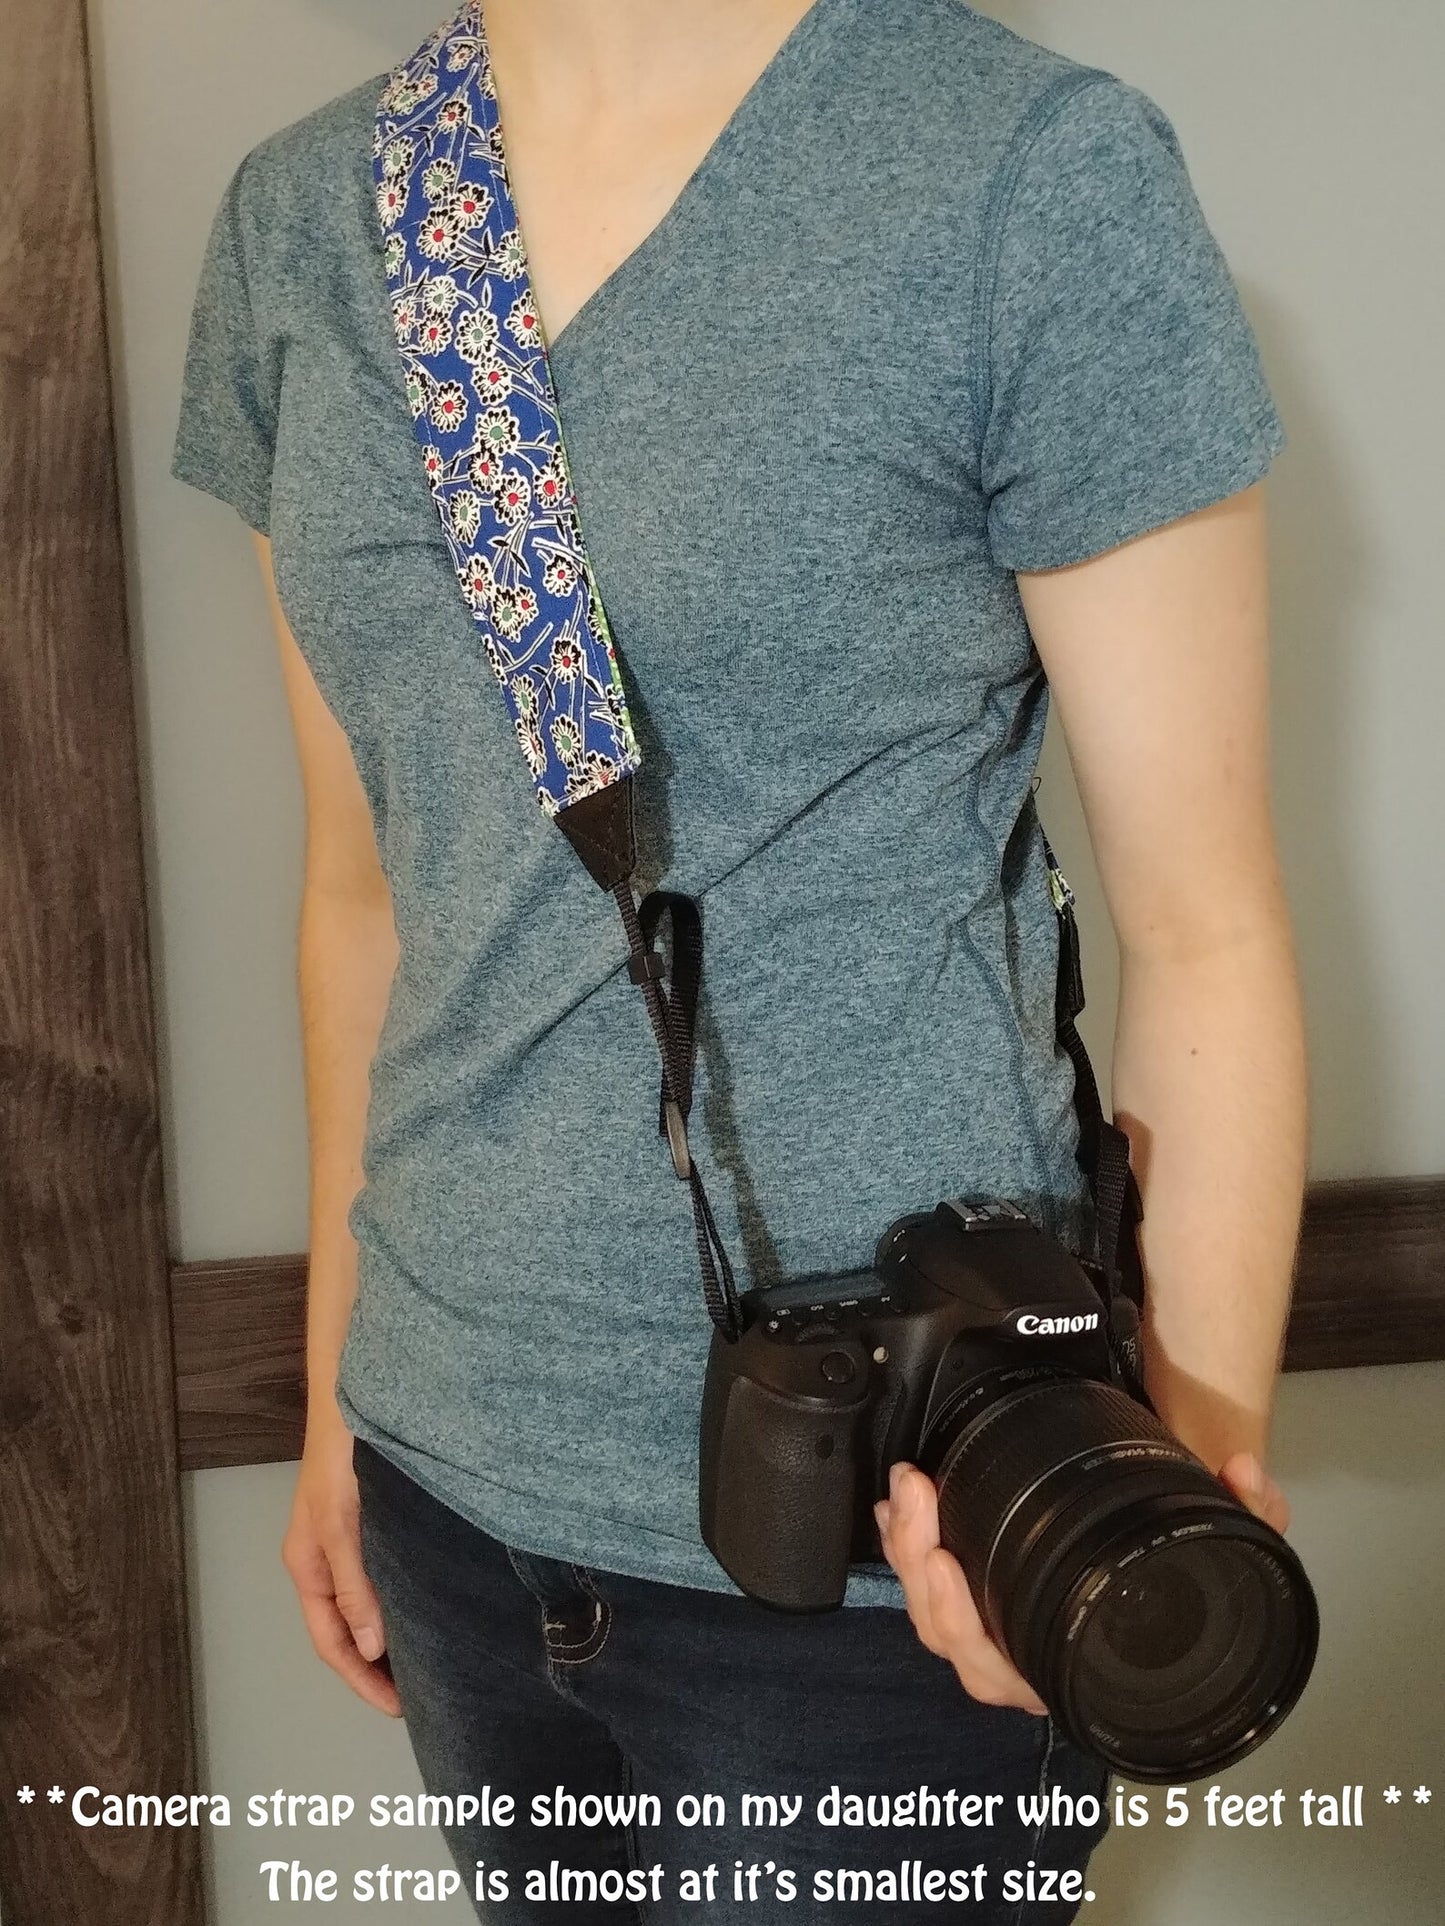 Butterfly Adjustable Handmade Fabric Camera Strap - DSLR Strap - Photography Accessories - Gift